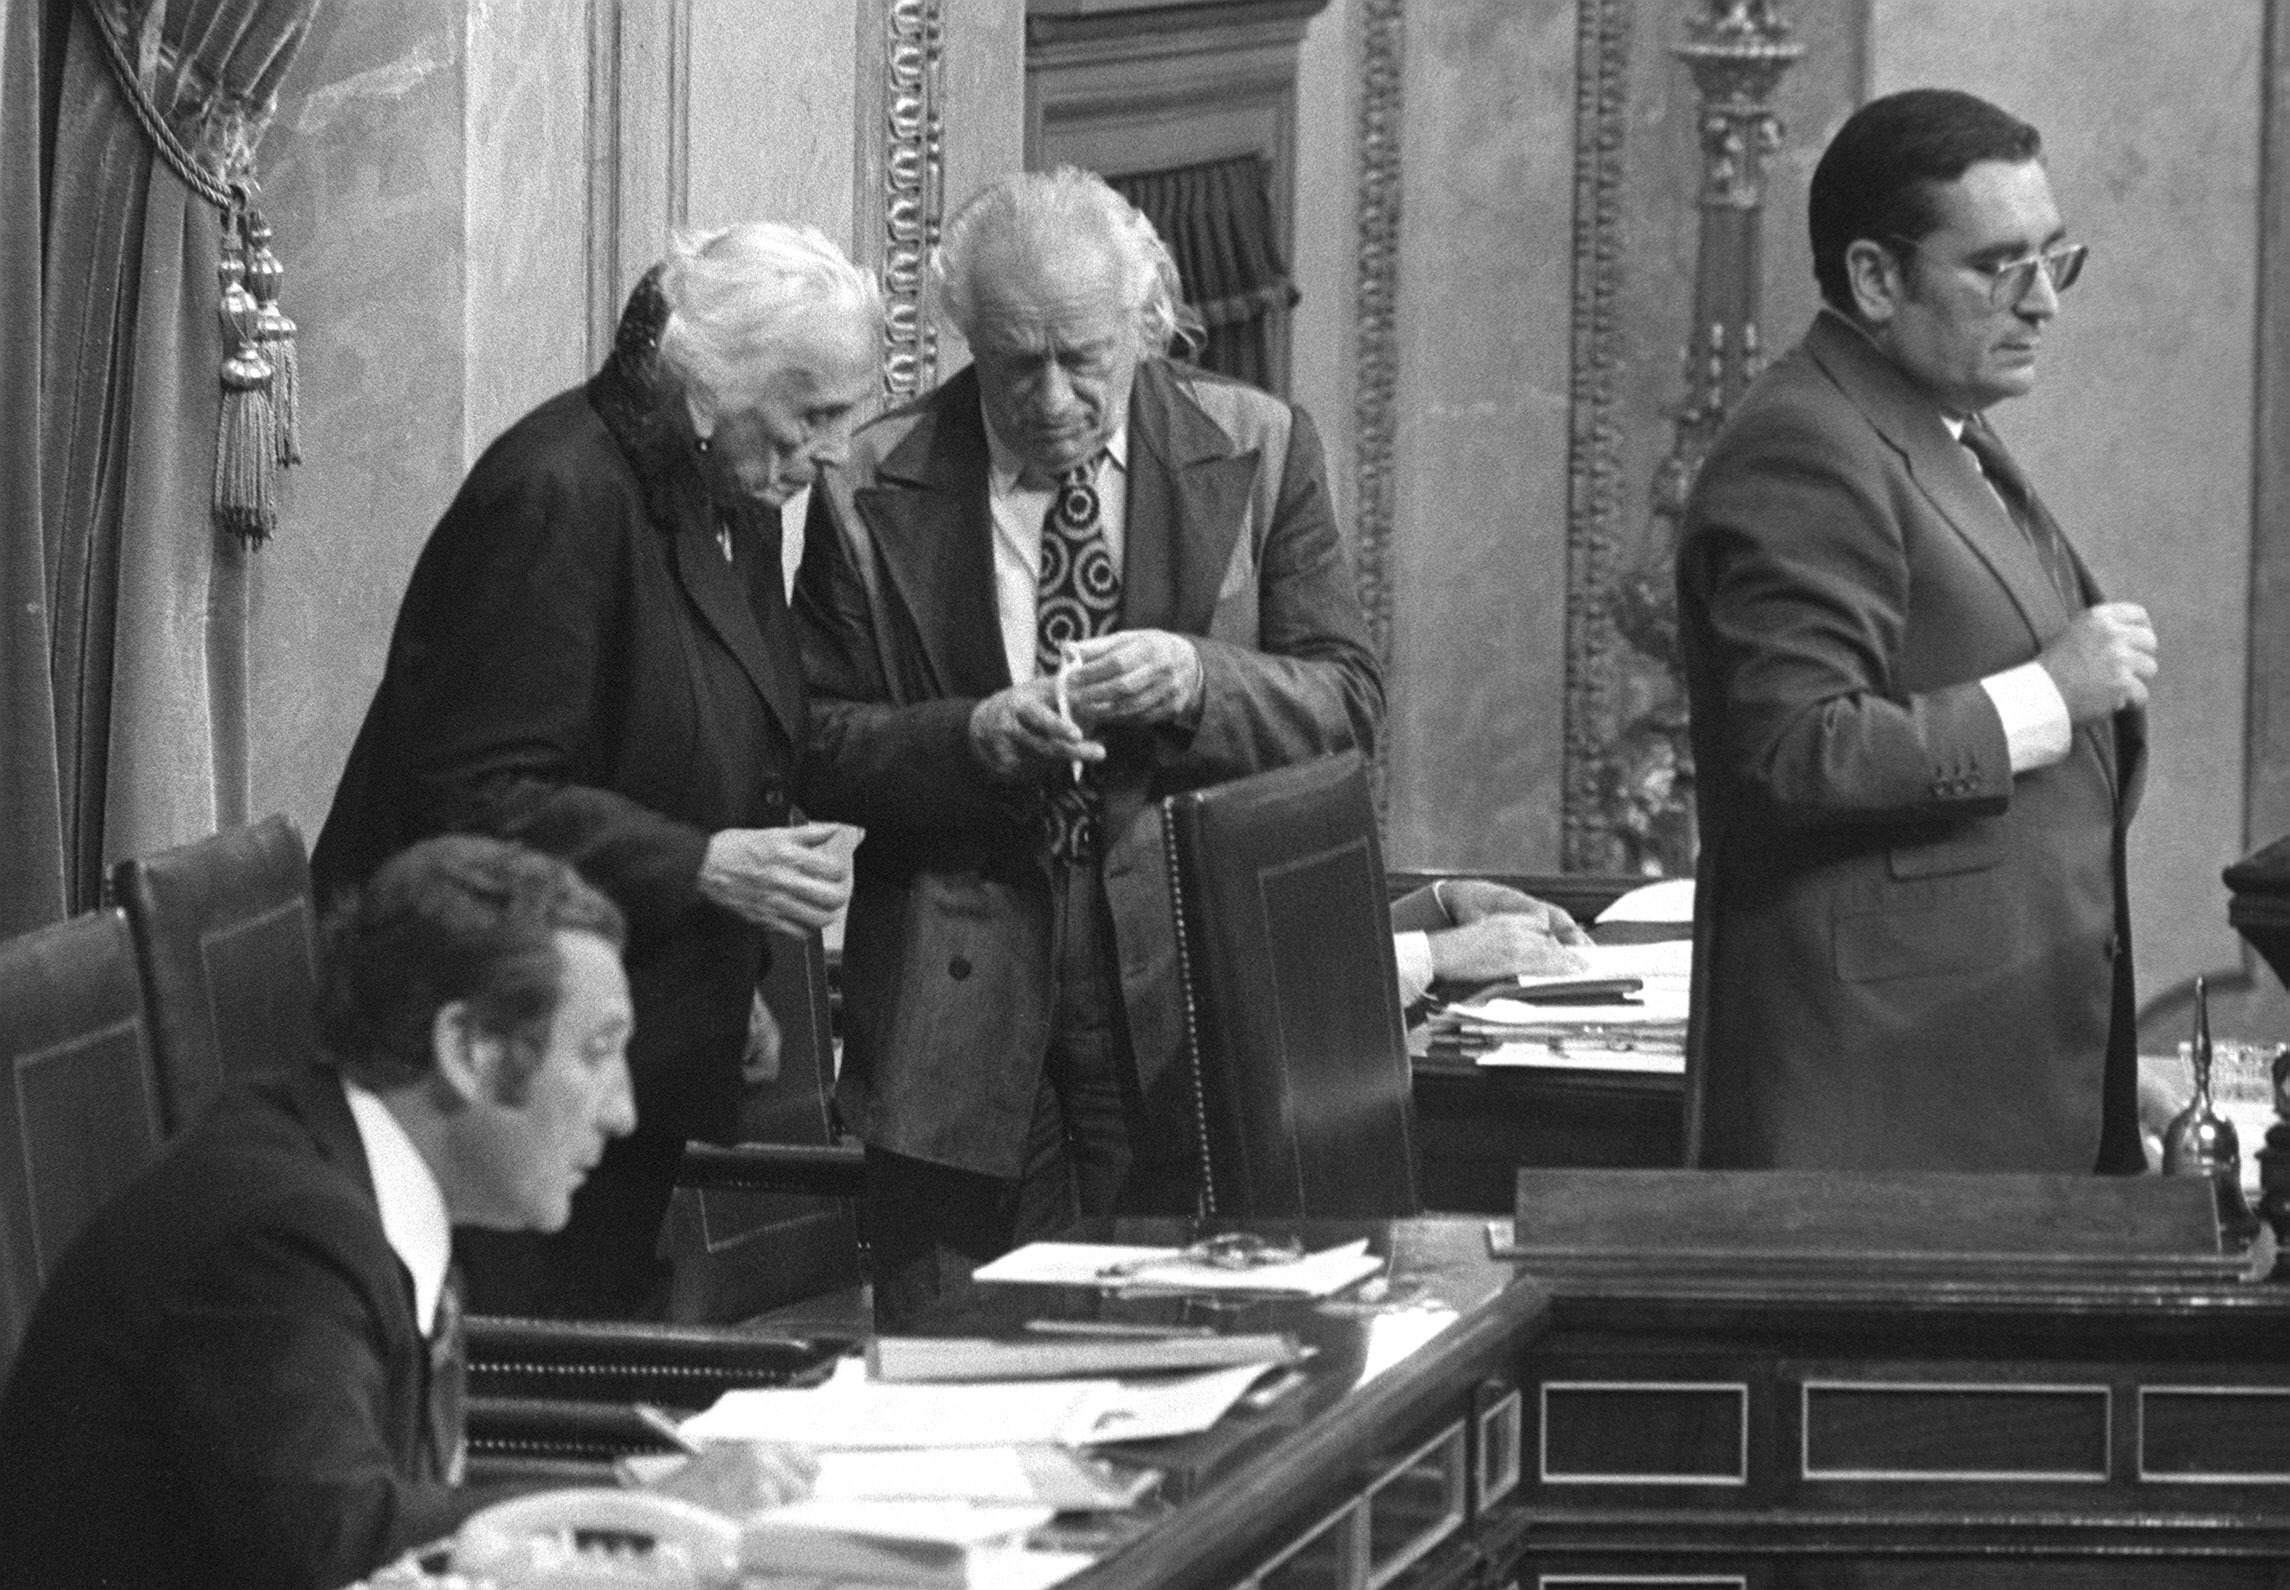 Dolores Ibarruri, president of the PCE, and Rafael Alberti at the Congress of Deputies in 1977.